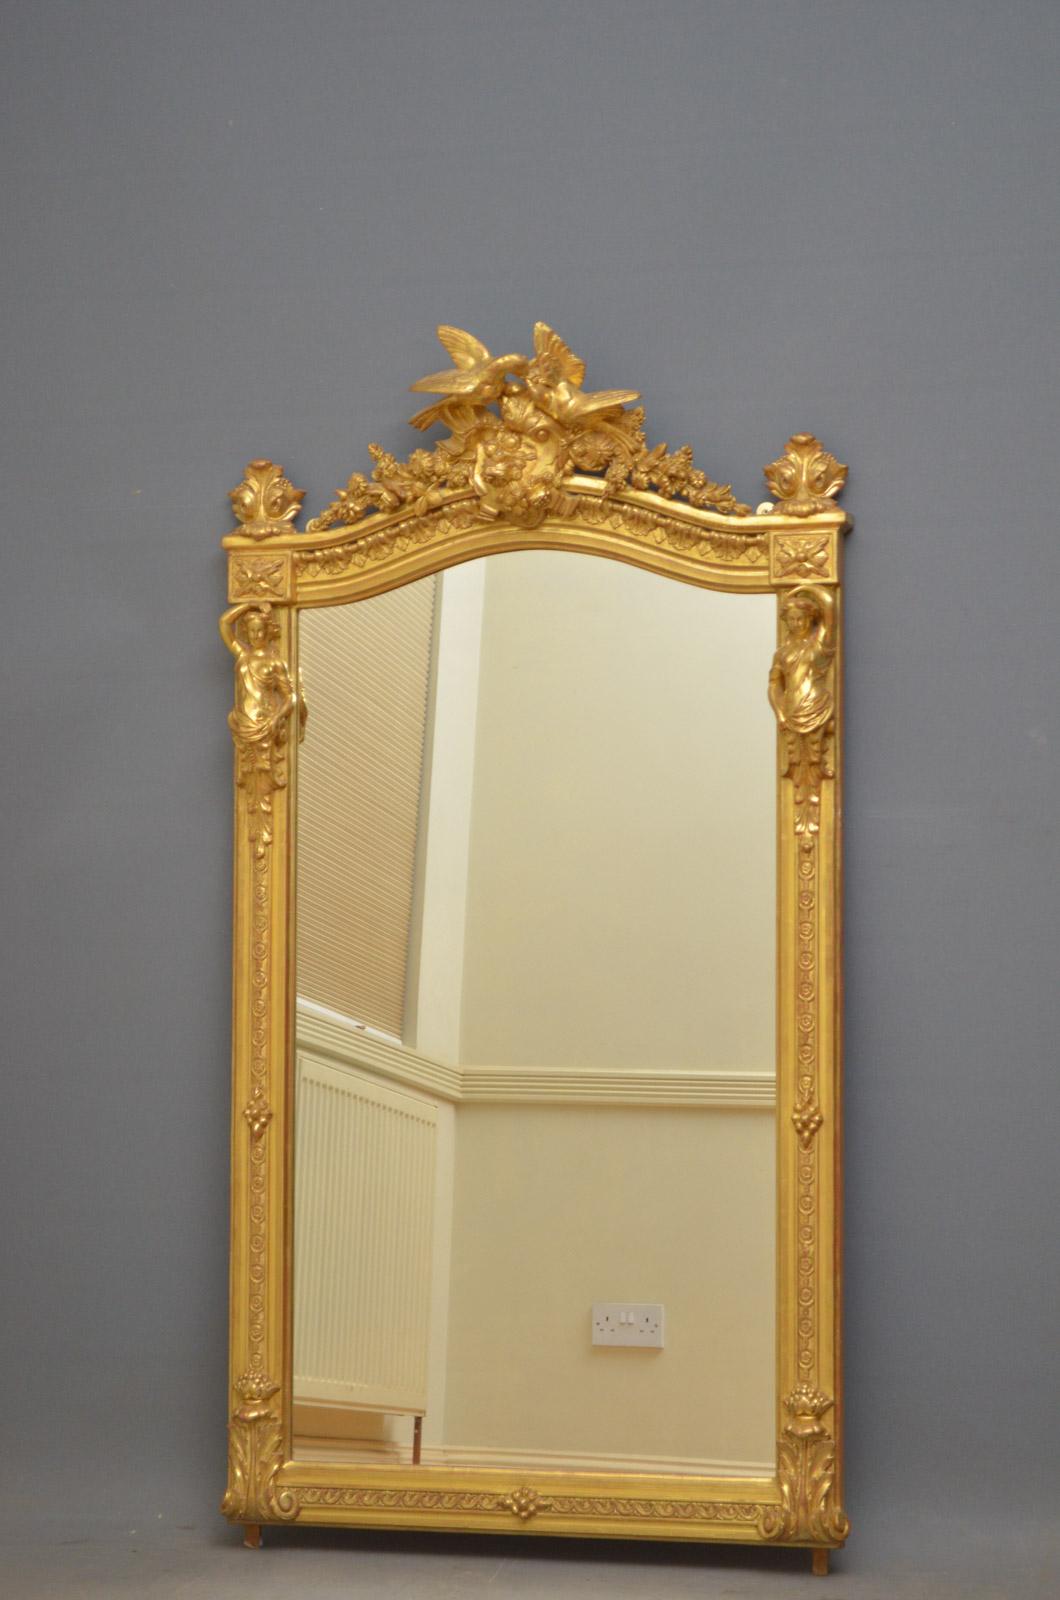 Sn4516 fine quality and very elegant early 19th century gilded wall mirror, having original mirror plate in finely decorated frame. This antique mirror retains its original gilt and is exceptional home ready condition, circa 1830.
Measures: H 62